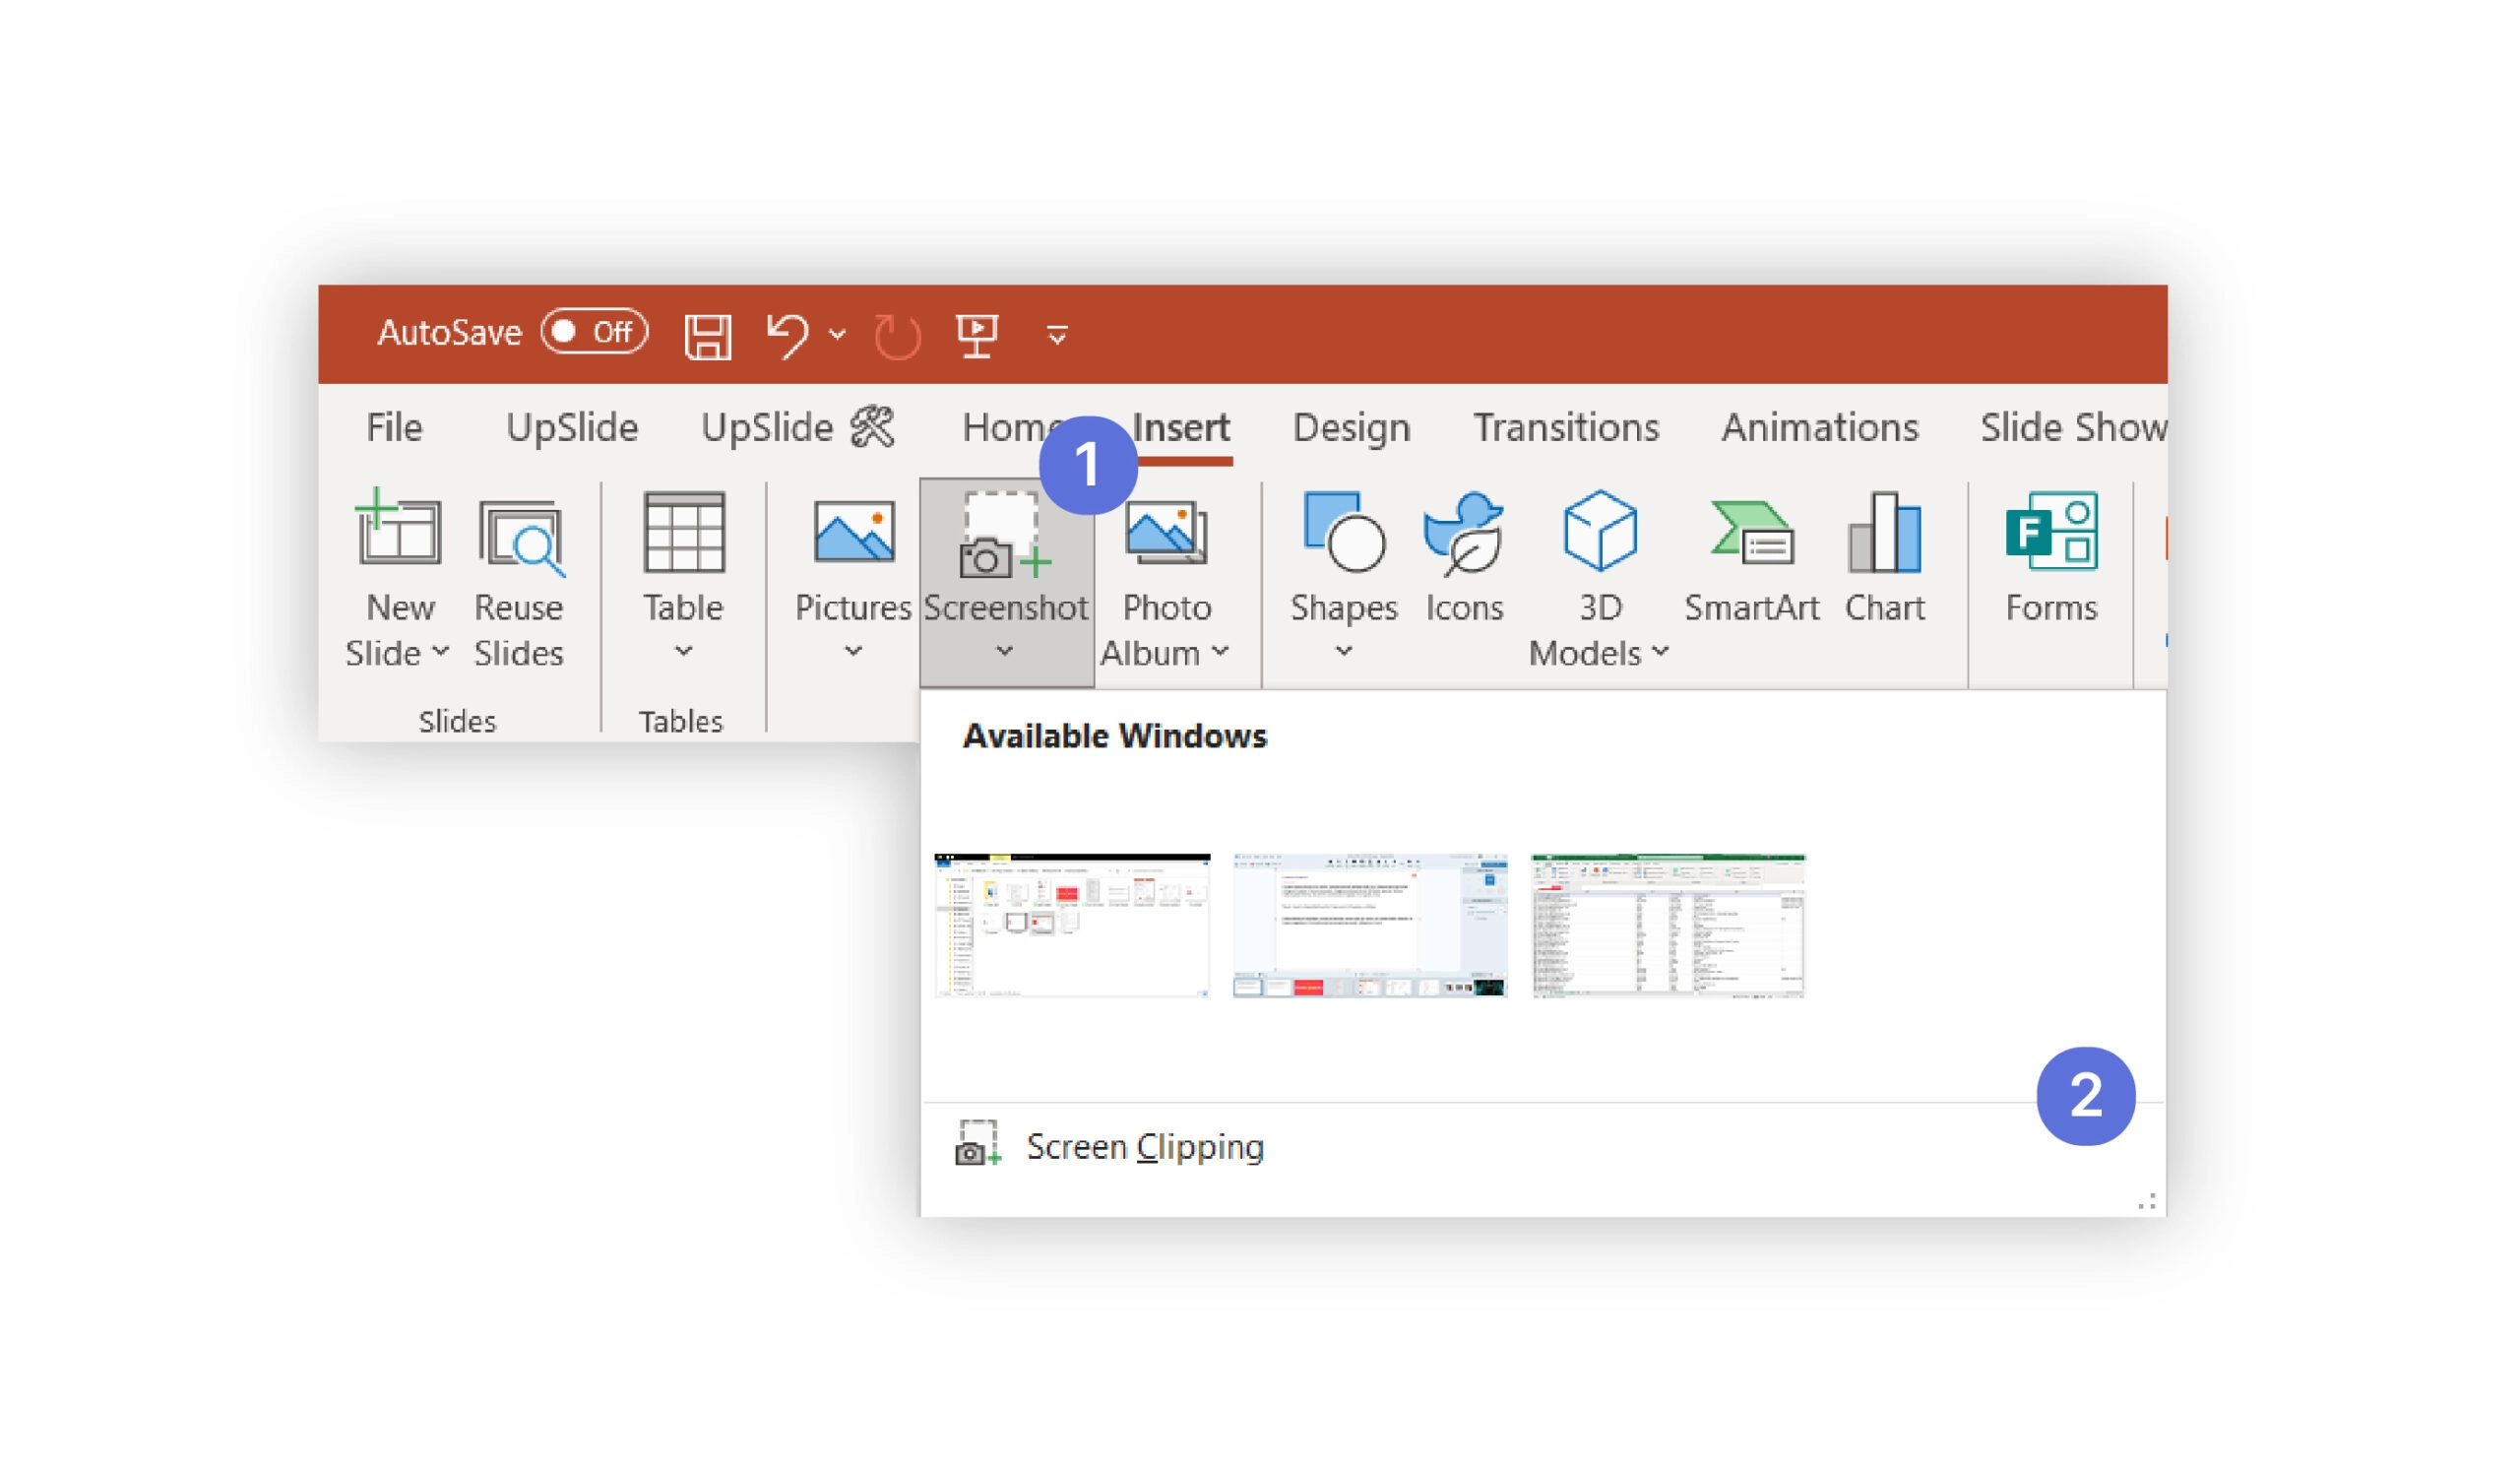 How to take a screenshot of a window within PowerPoint